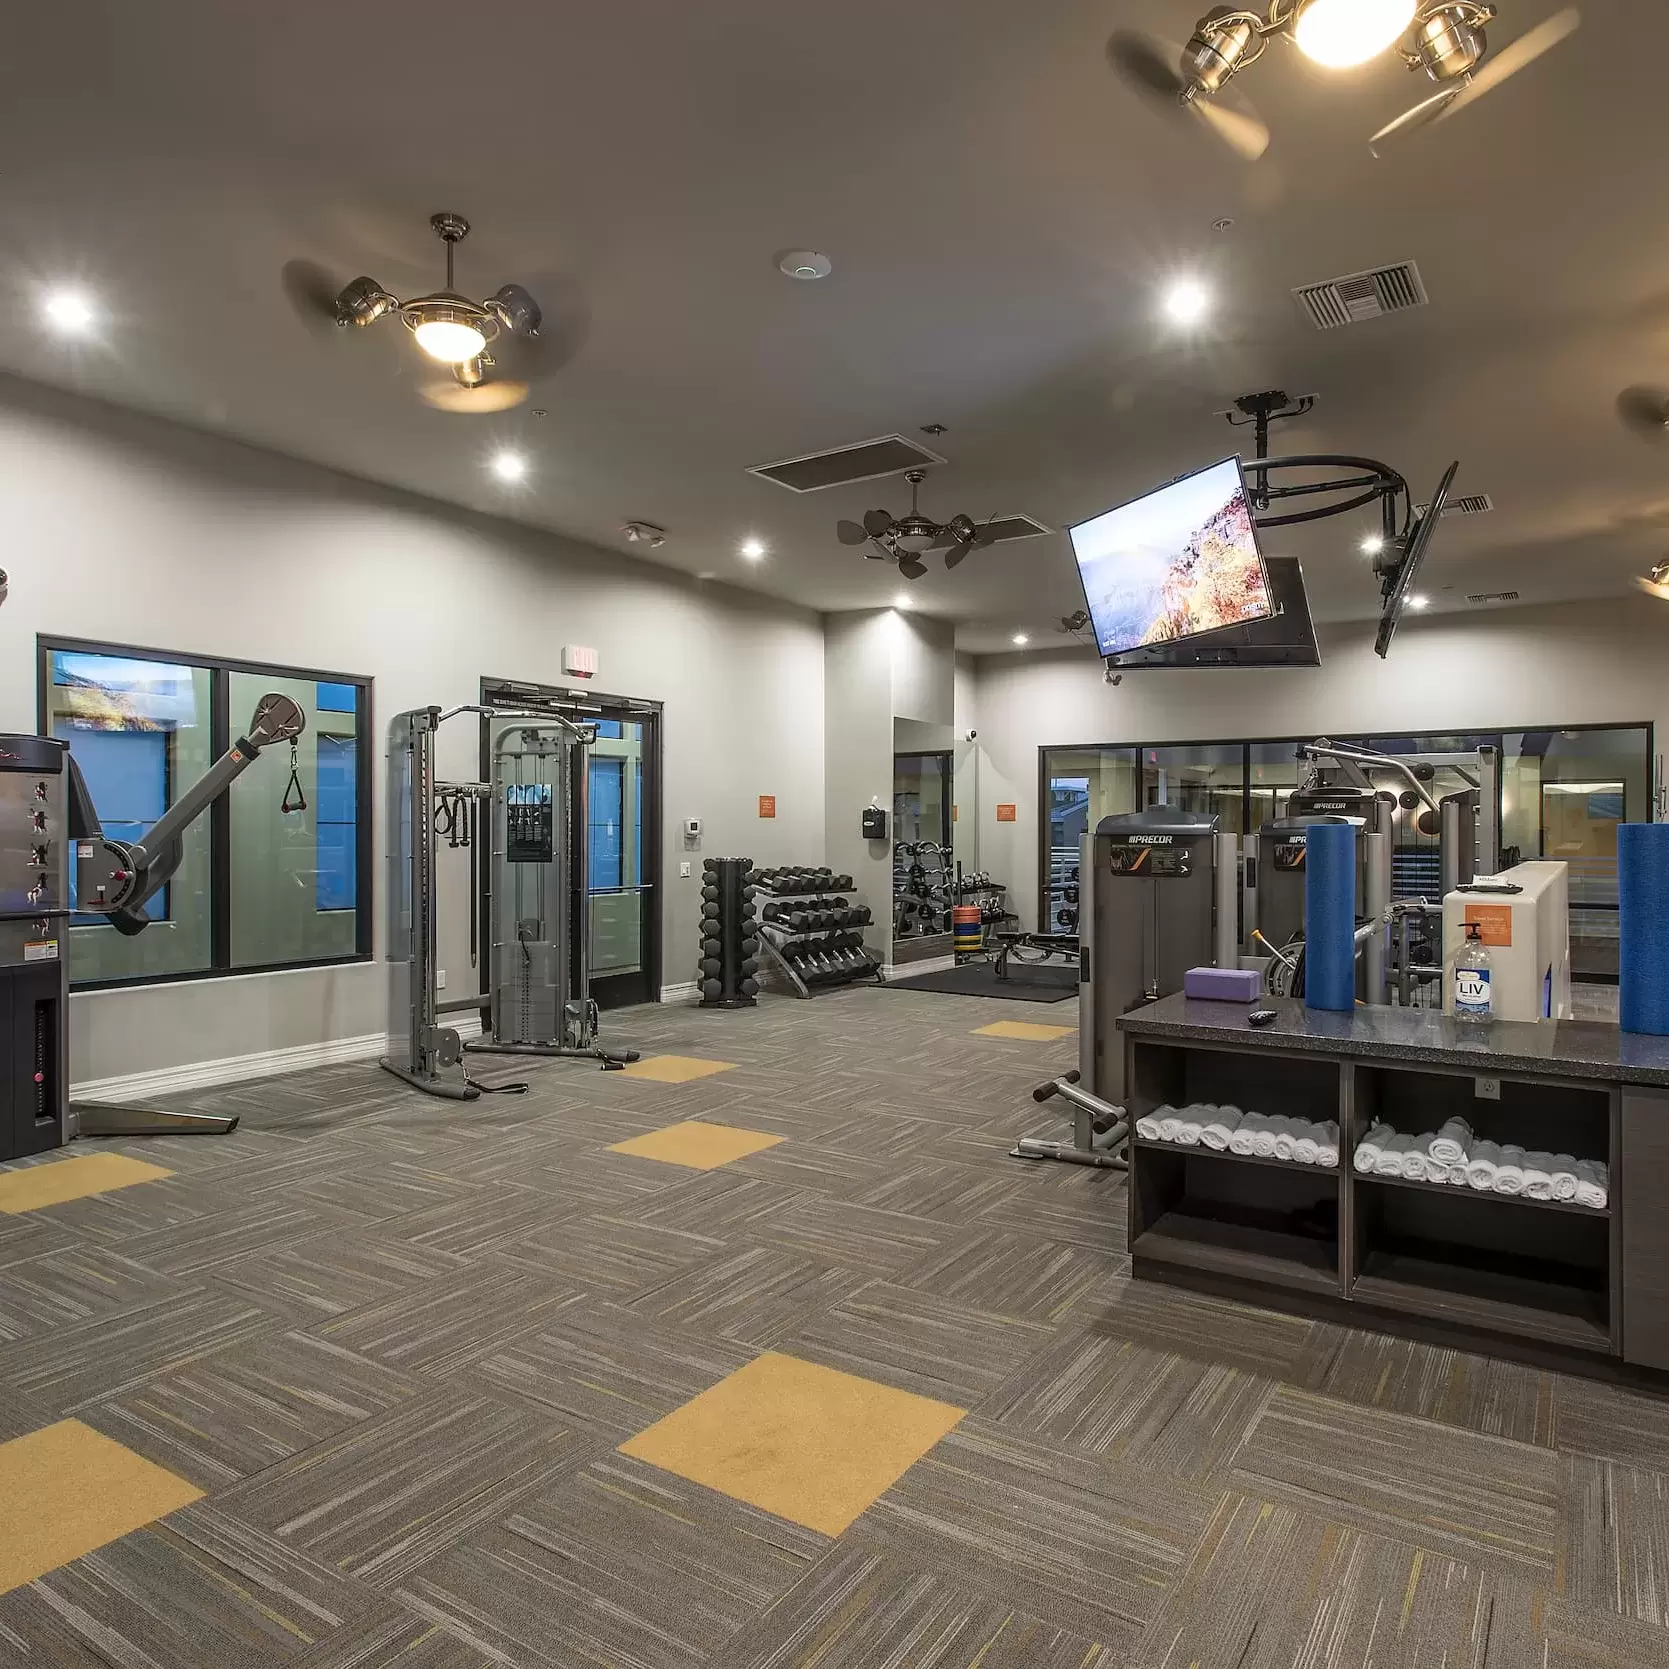 The fitness center, with lots of exercise equipment and weights available for residents to enjoy.